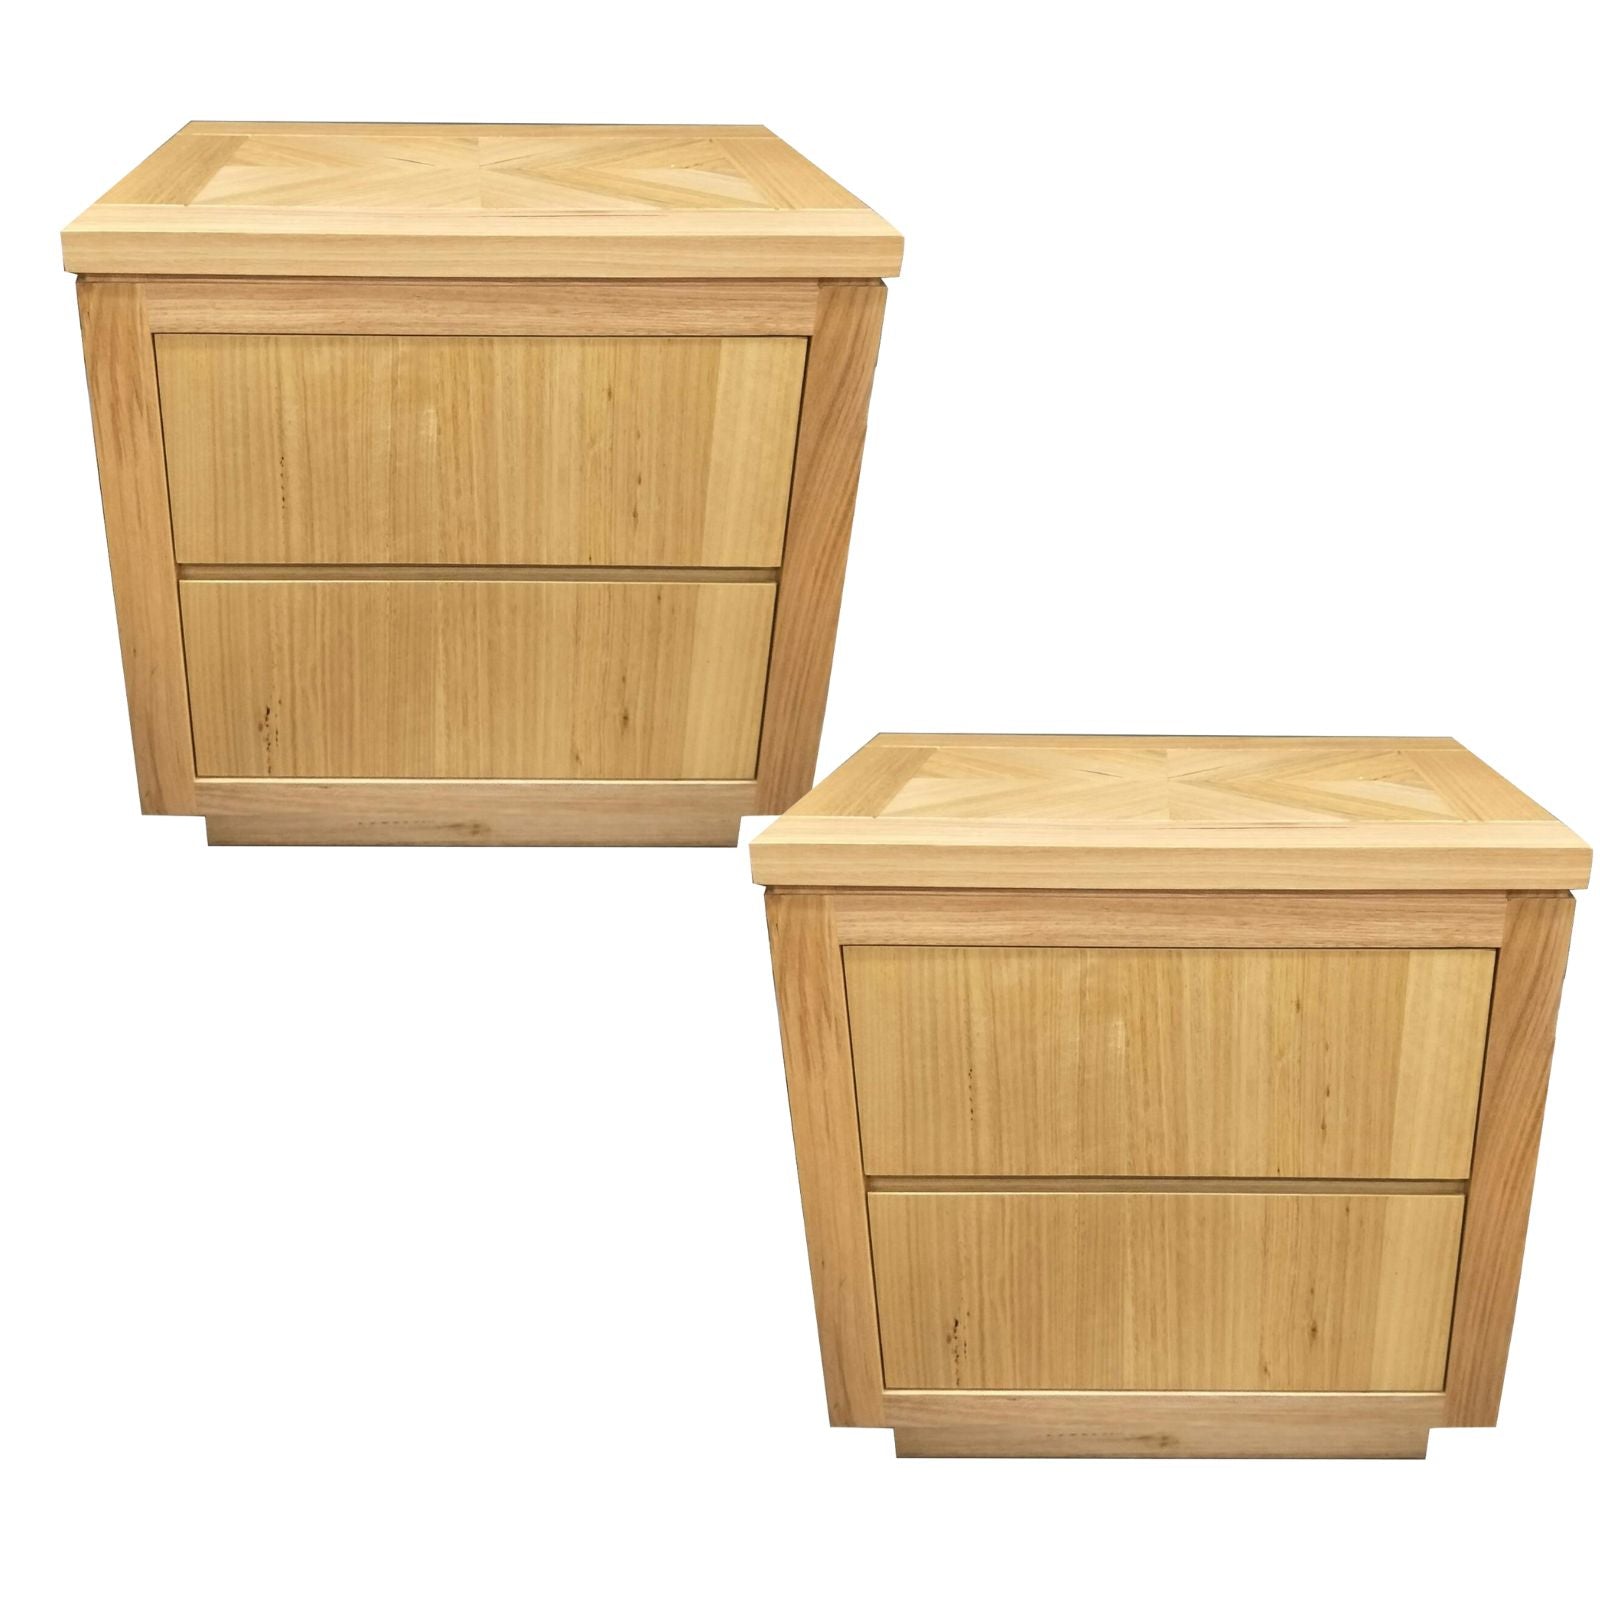 Elegant Nightstand End Tables with Ample Storage Space